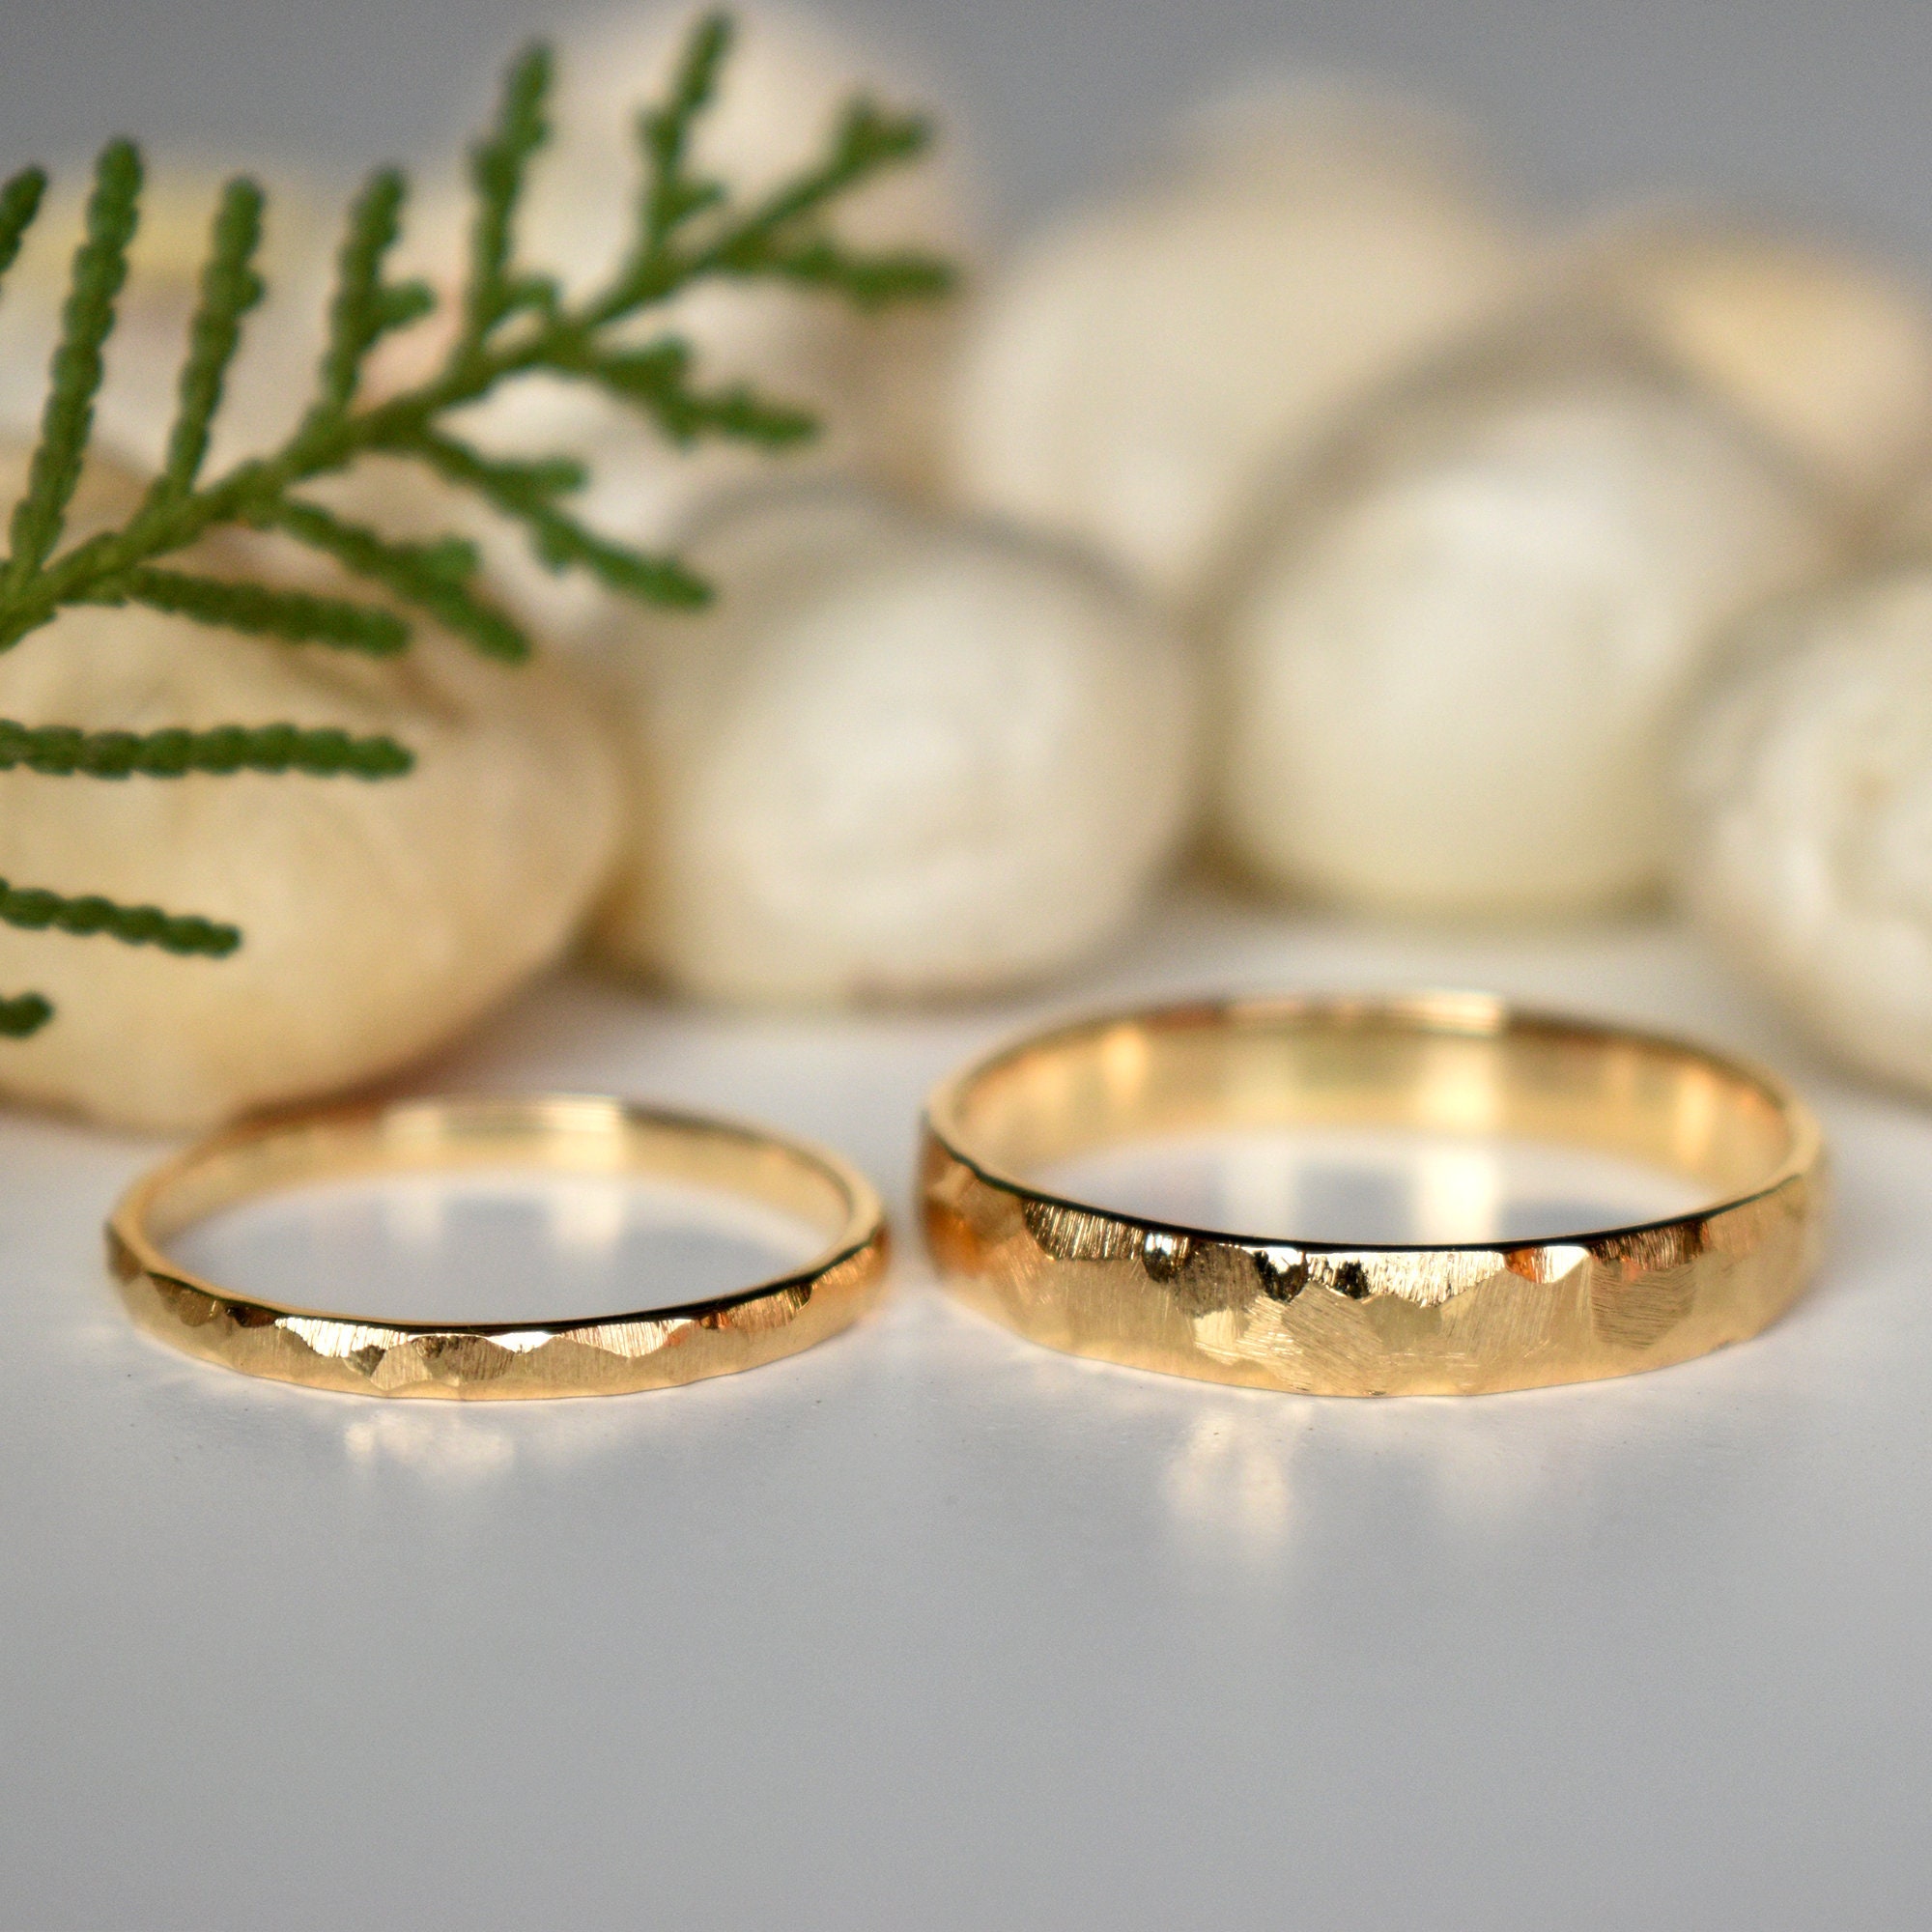 Buy Simple Gold Wedding Band Set. His and Hers Wedding Rings. Gold Wedding  Rings. Thin Wedding Bands. Couple Rings Set. 14k Gold Bands. Online in  India - Etsy